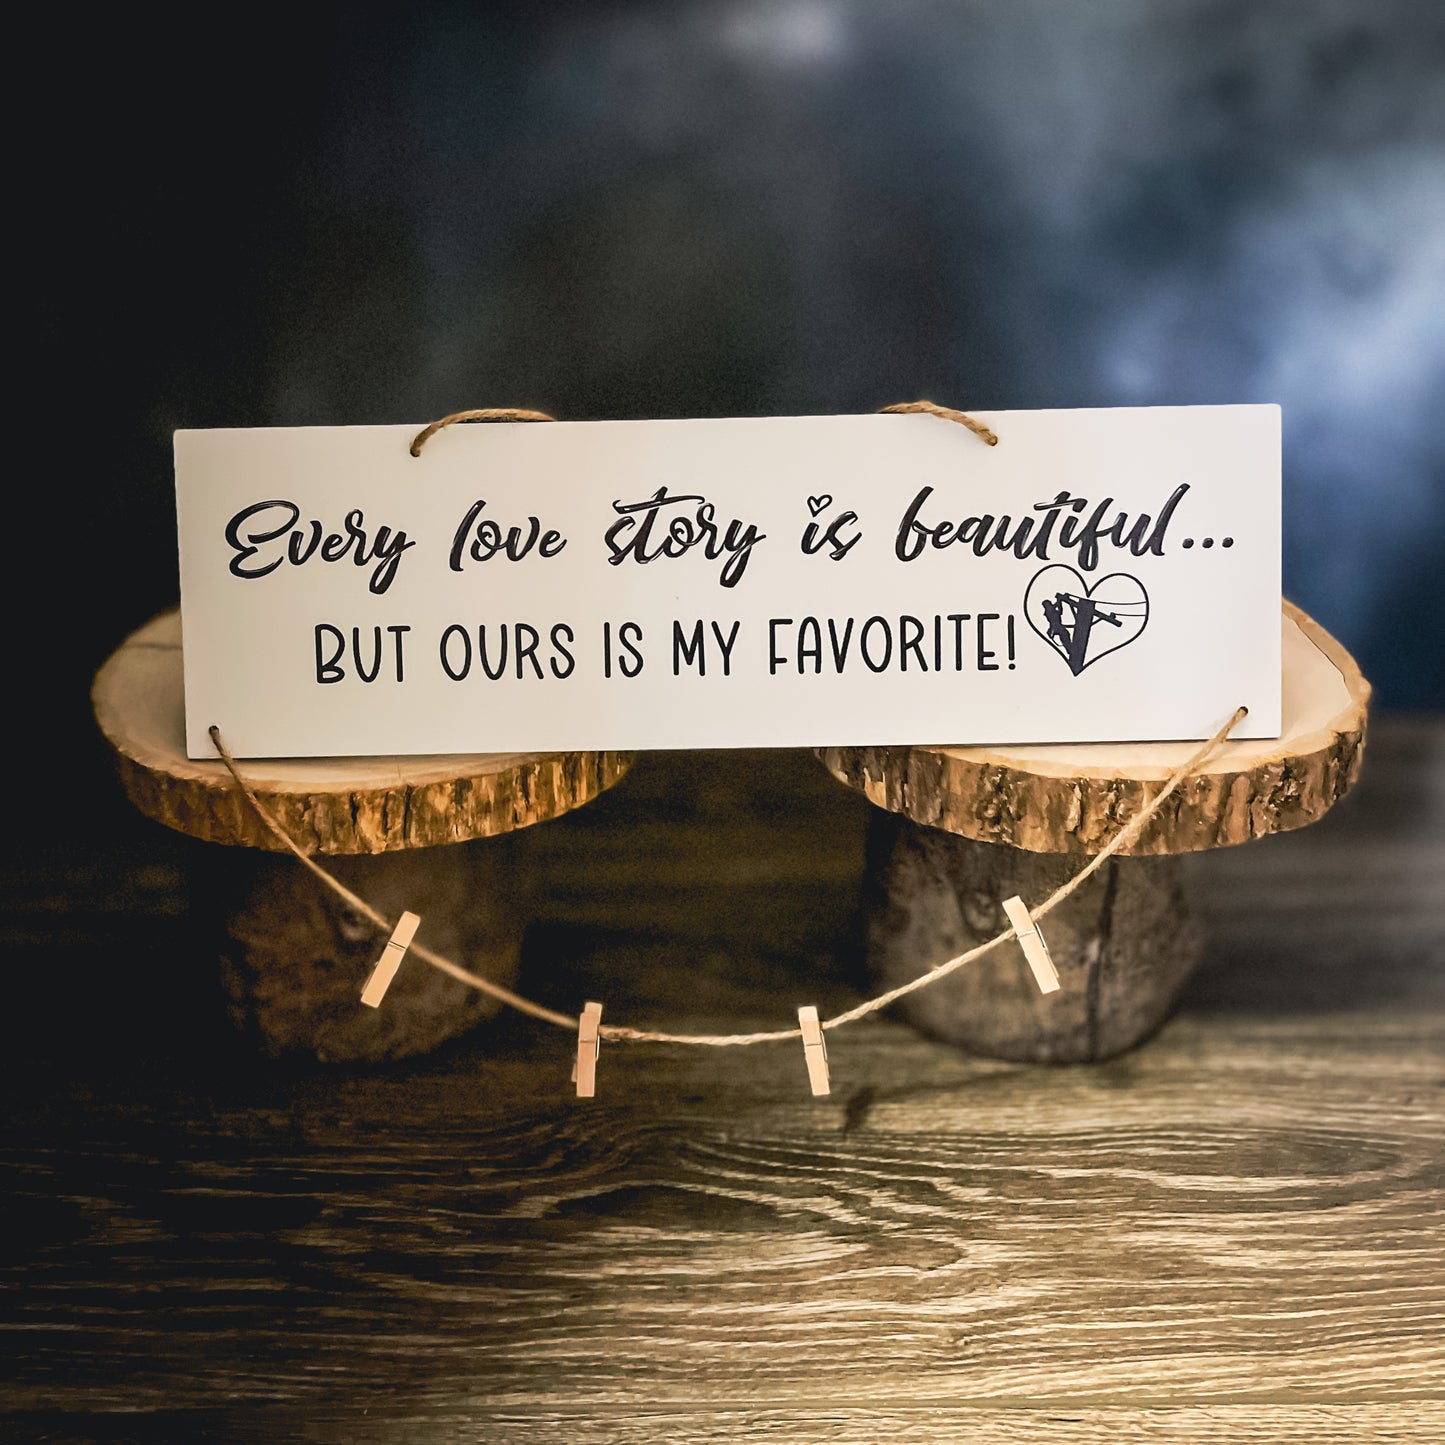 Every love story is beautiful Wooden photo holder sign for lineladies linemen linebabes to hang in their home or use at weddings birthdays anniversaries and more 